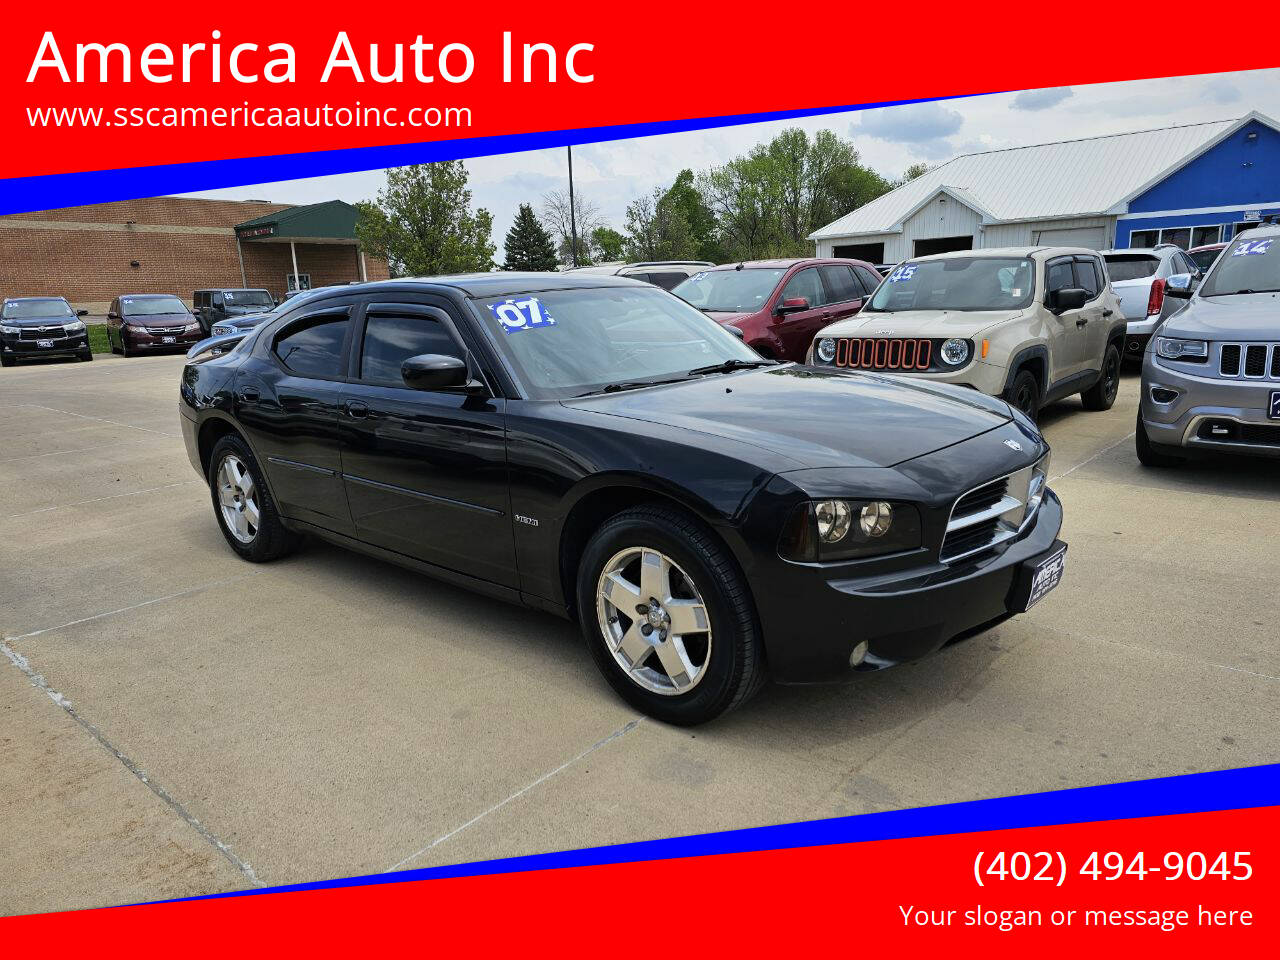 2007 Dodge Charger For Sale ®